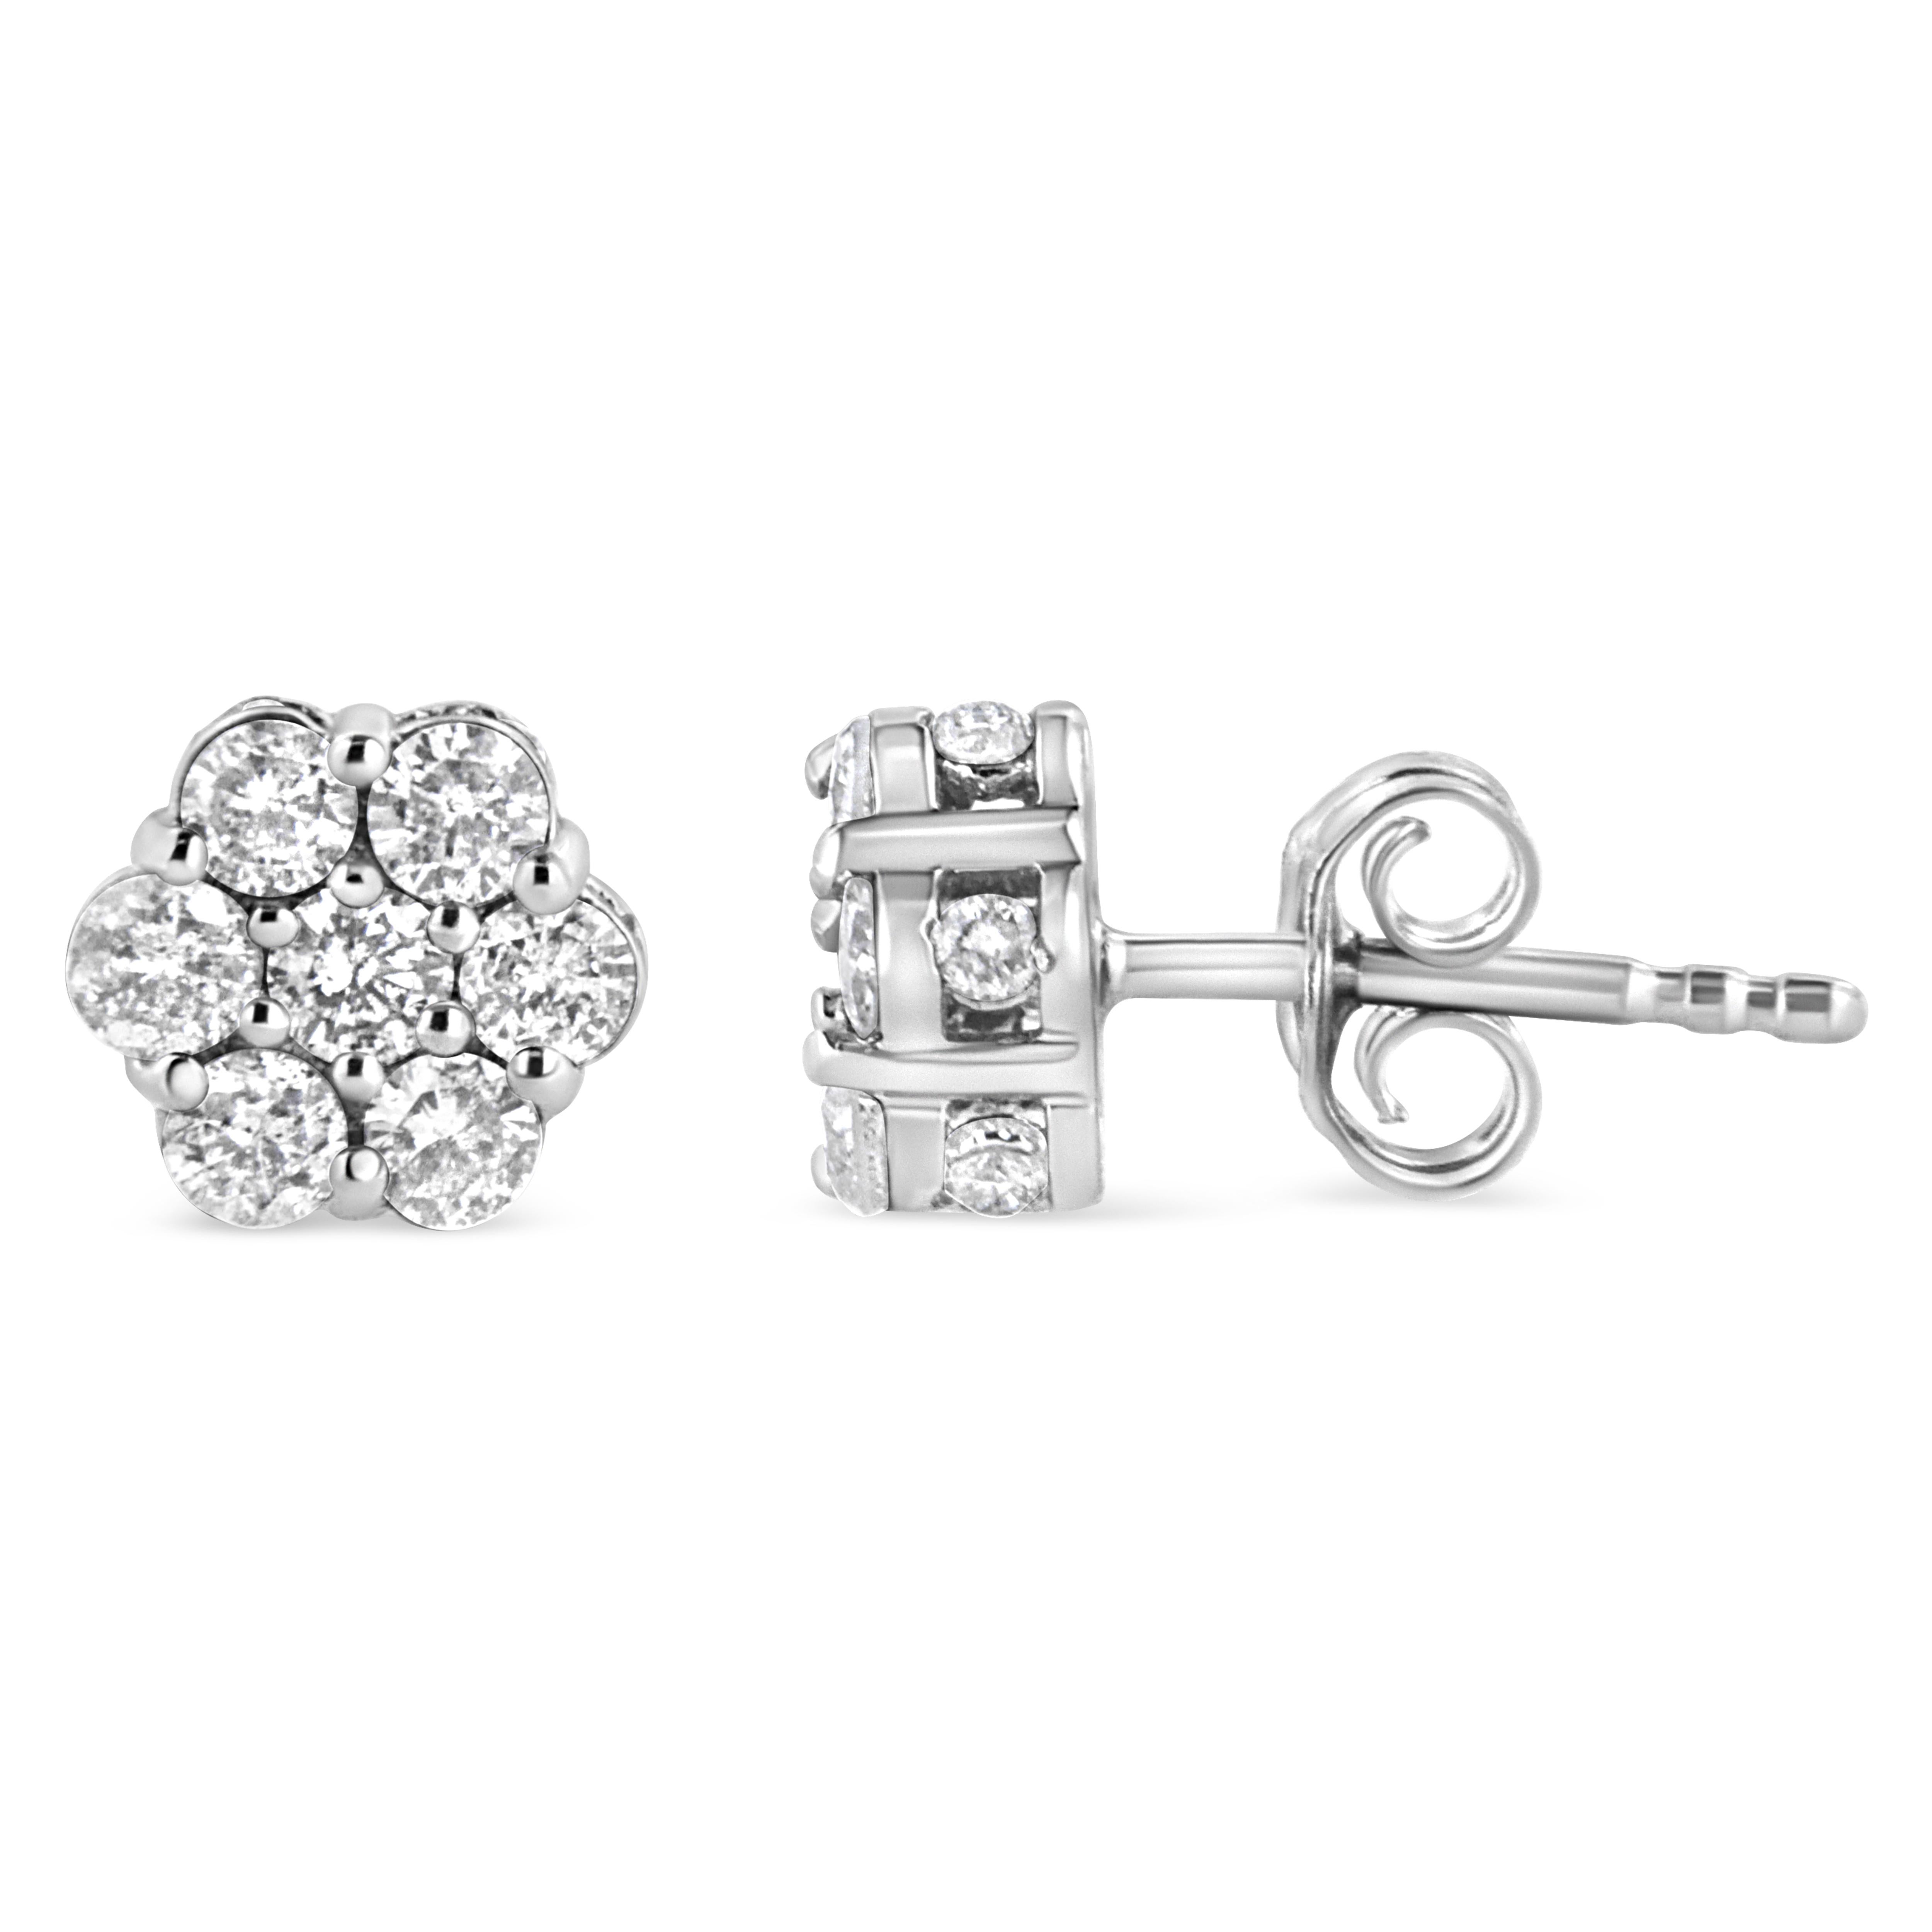 Elegant and timeless, these sparkling diamond stud earrings boast a beautiful floral design with a total carat weight of 1 cttw. This authentic design is crafted of real 92.5% sterling silver that has been electro-coated with genuine rhodium (a